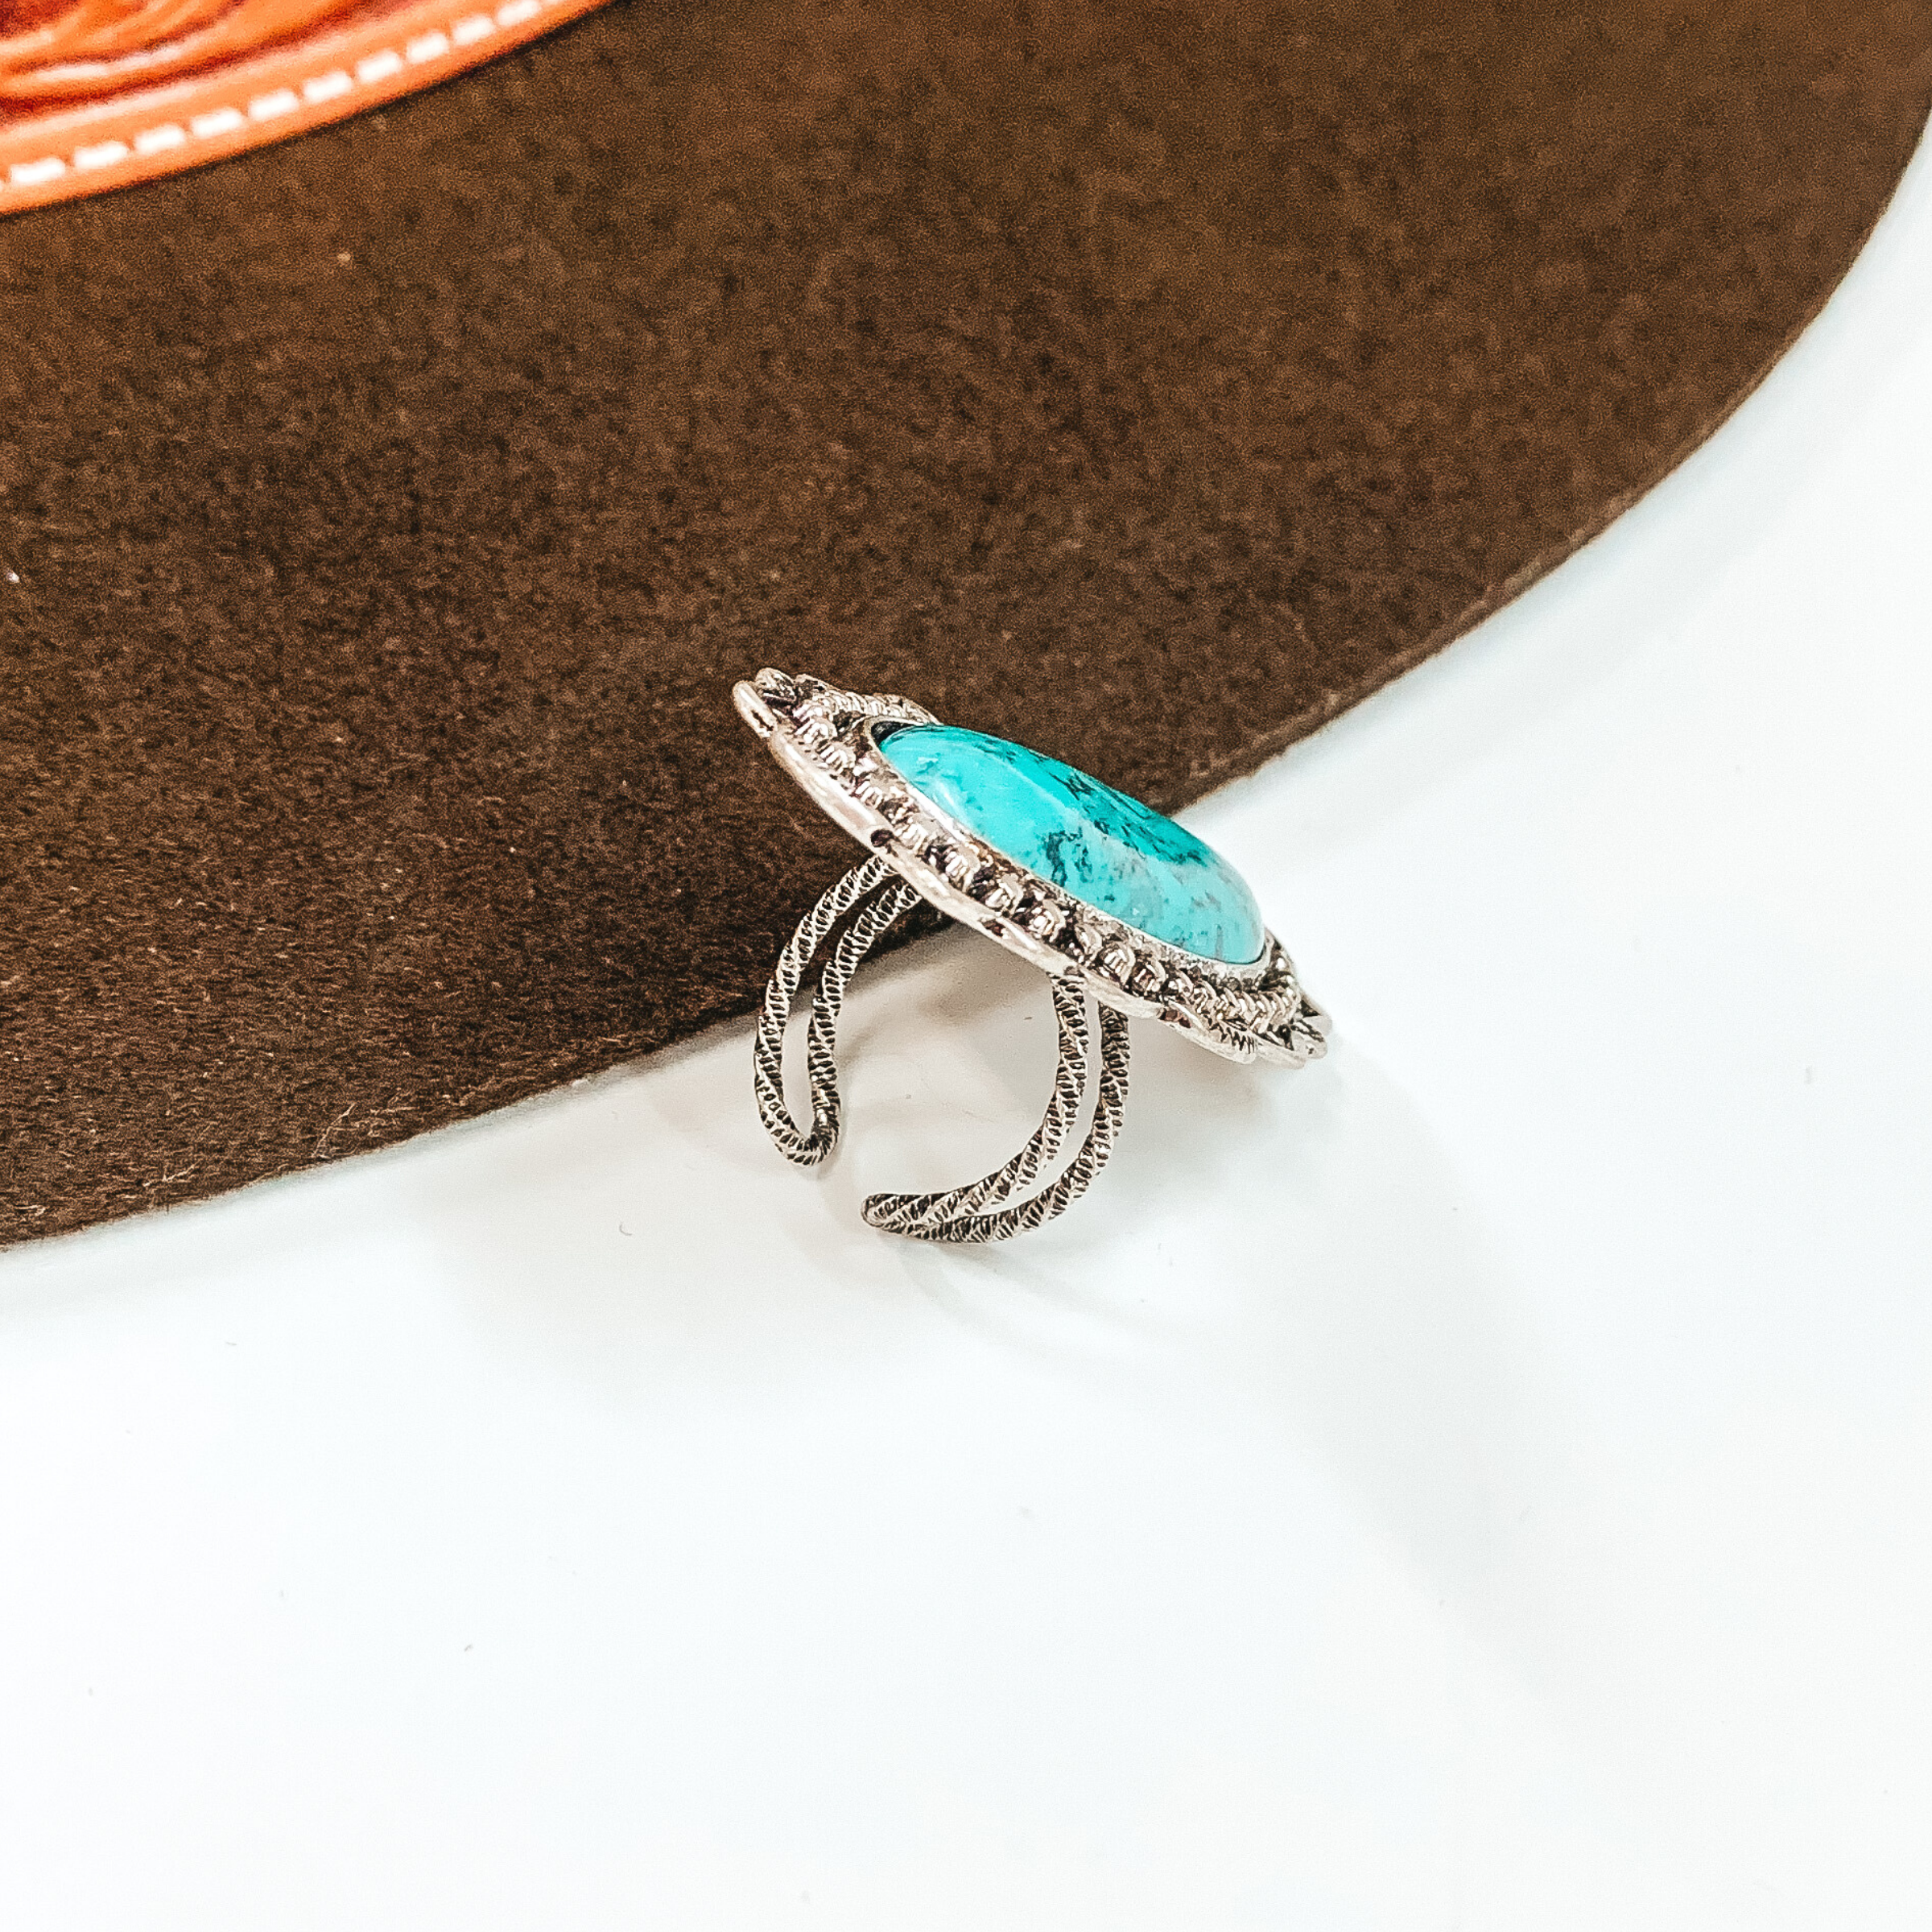 Oval Stone with Silver Tone Detailing Cuff Ring in Turquoise - Giddy Up Glamour Boutique